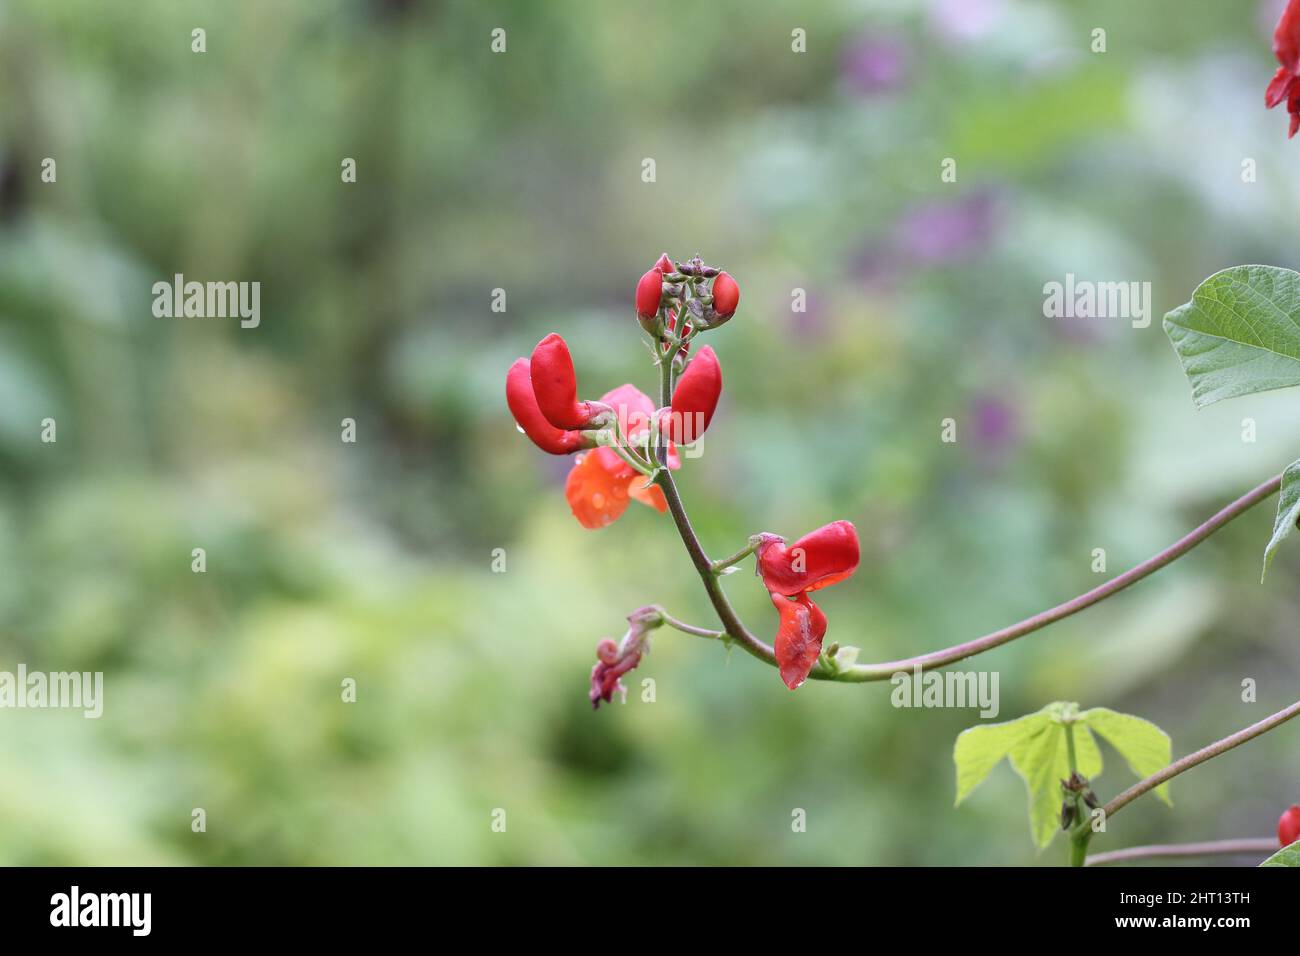 Blossom of fire been, close-up.  Scarlet runner bean, phaseolus coccineus. Red bean blossom. Stock Photo